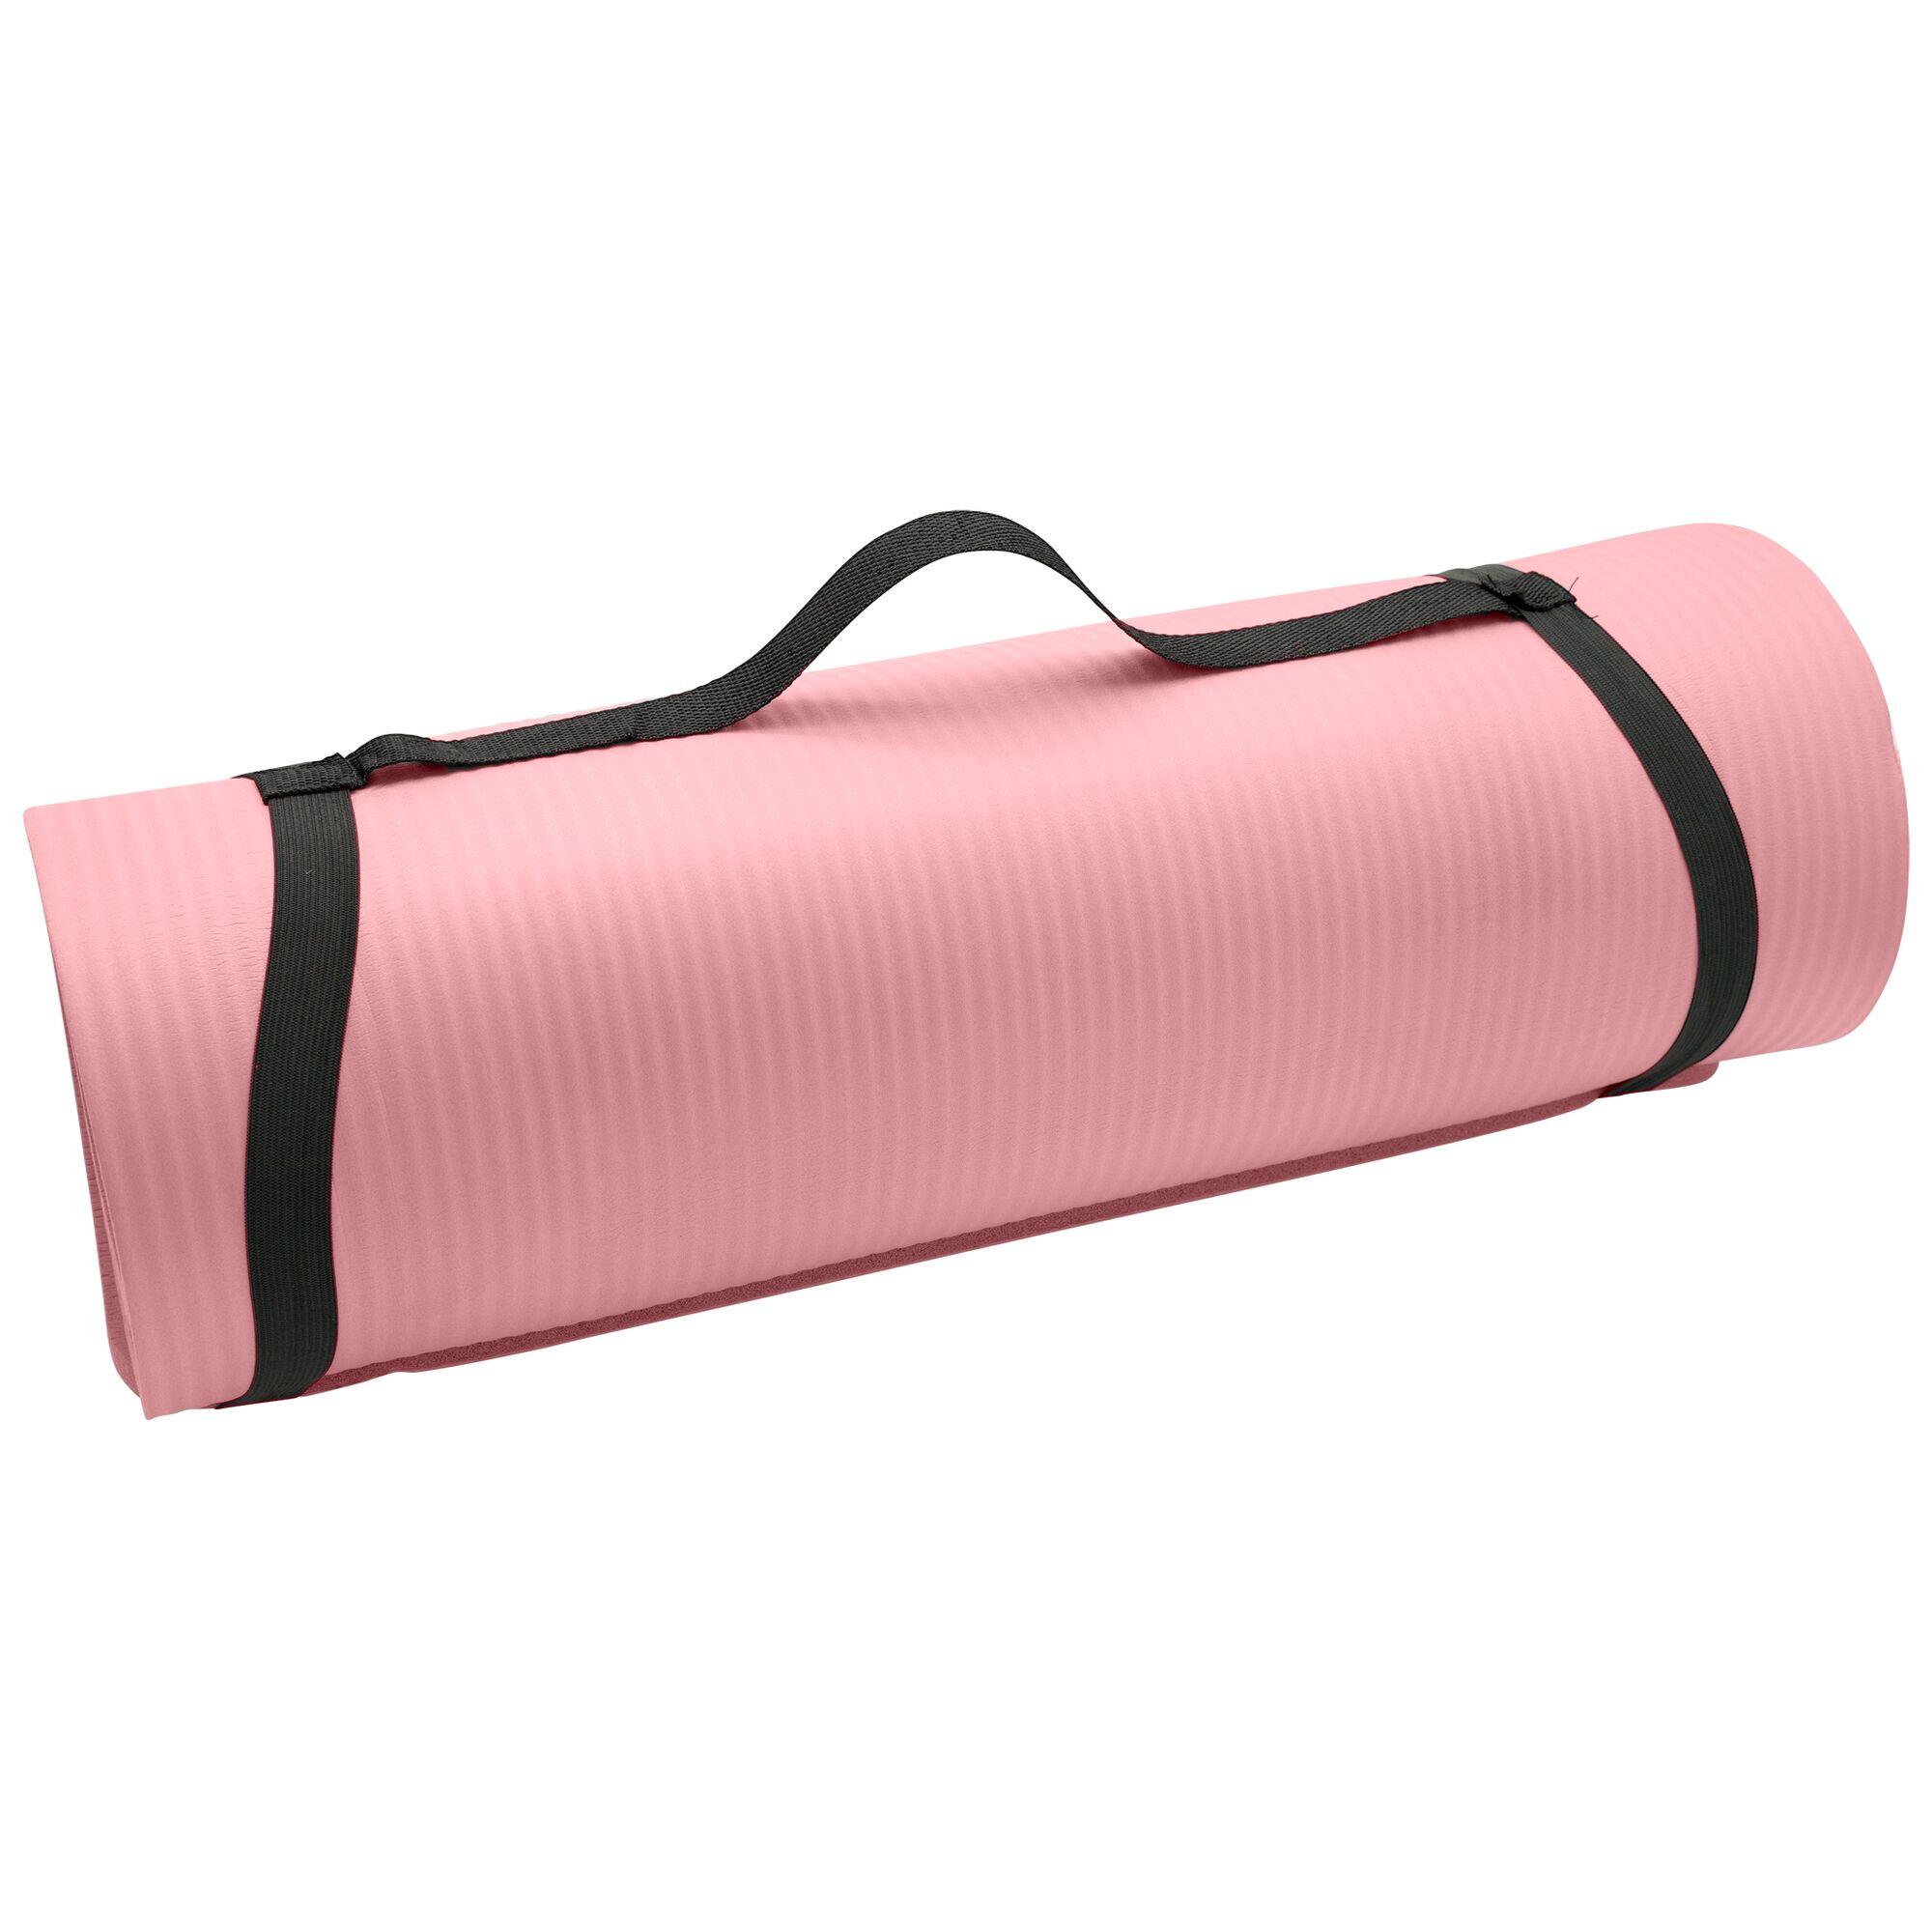 Adults' Home Fitness Yoga Mat - Pale Pink 4/4